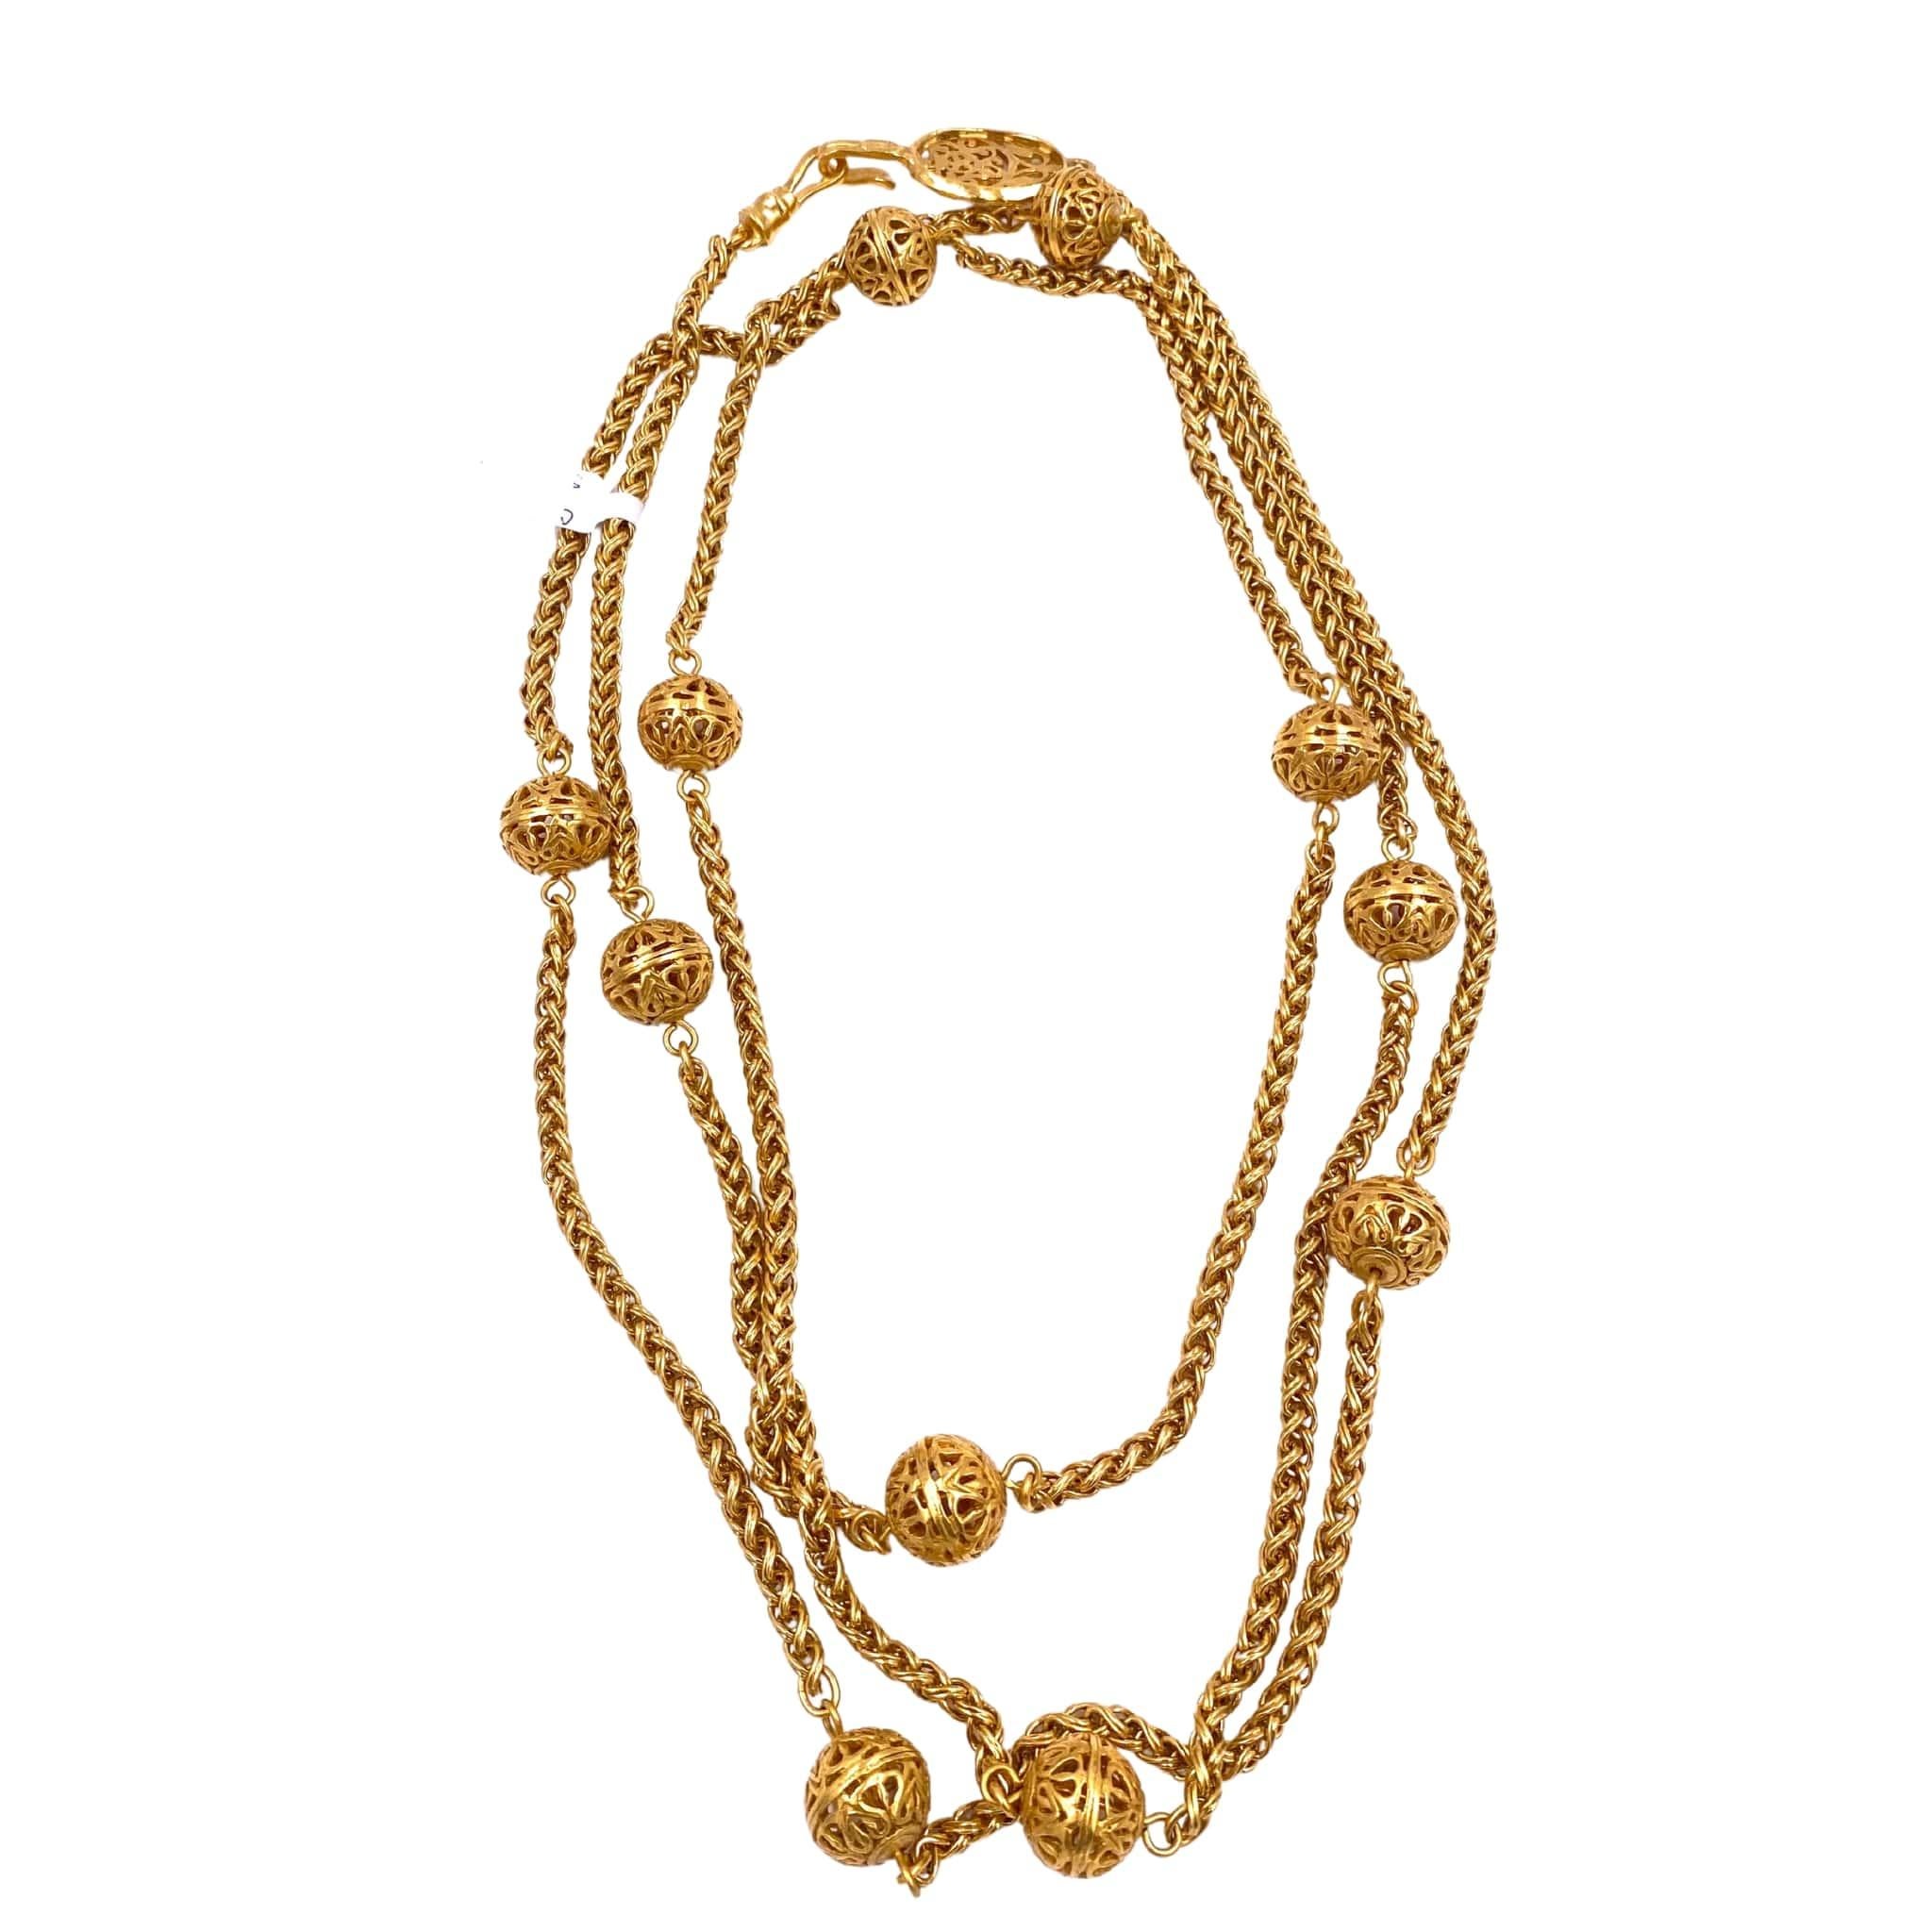 Elevate your style with this vintage Chanel 1995 Gold Long Chain. Featuring layers of intricate filigree balls, this piece adds a touch of elegance to any outfit. Own a piece of fashion history and stand out from the crowd with this luxurious